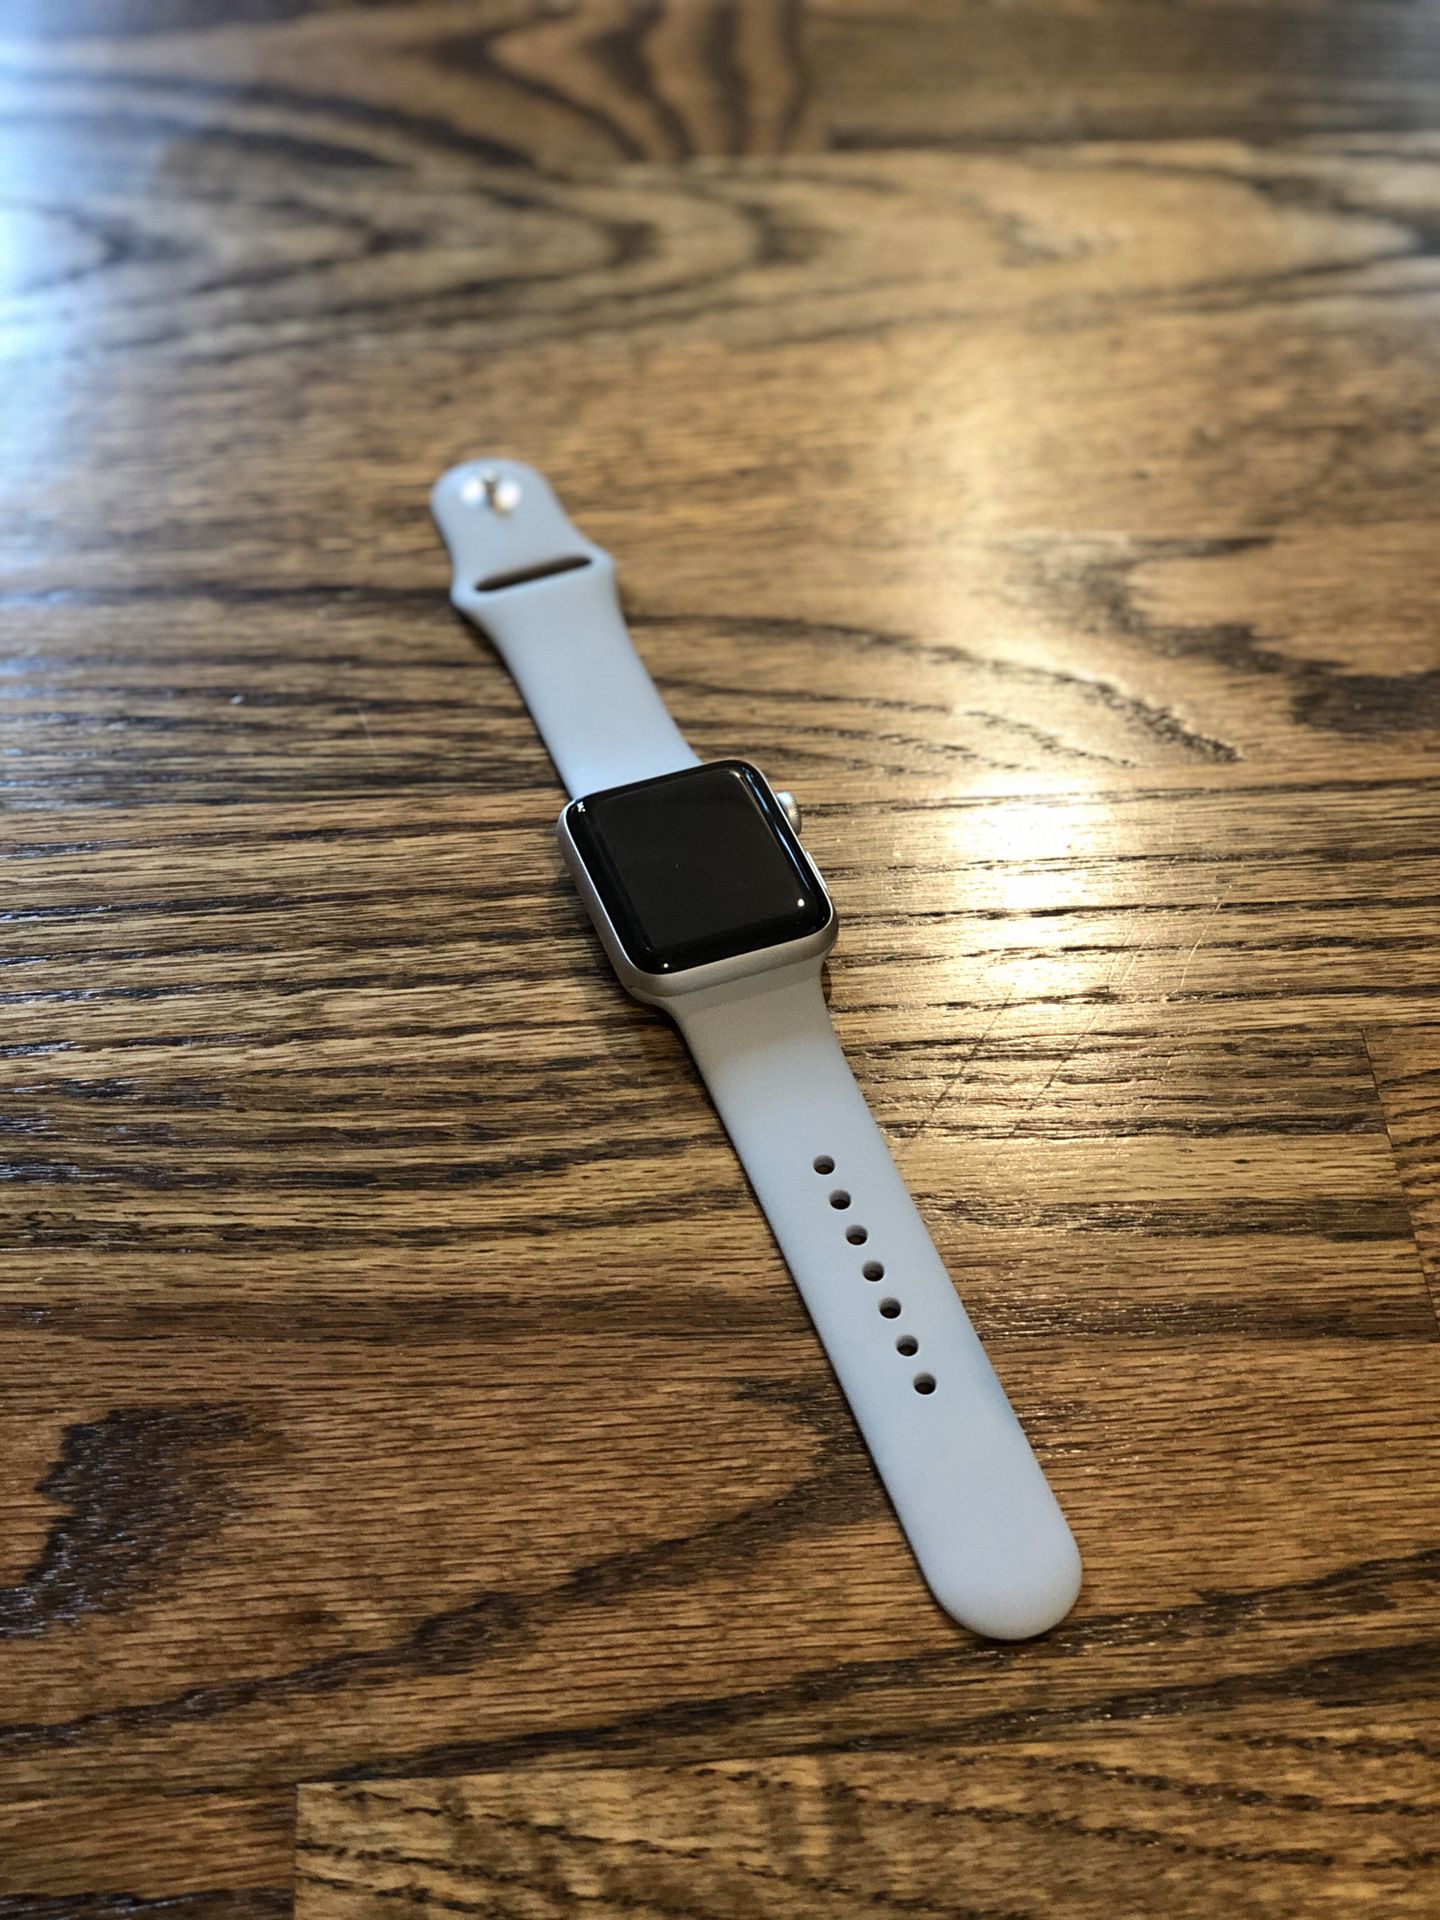 Apple Watch: 42mm Series 3 with GPS